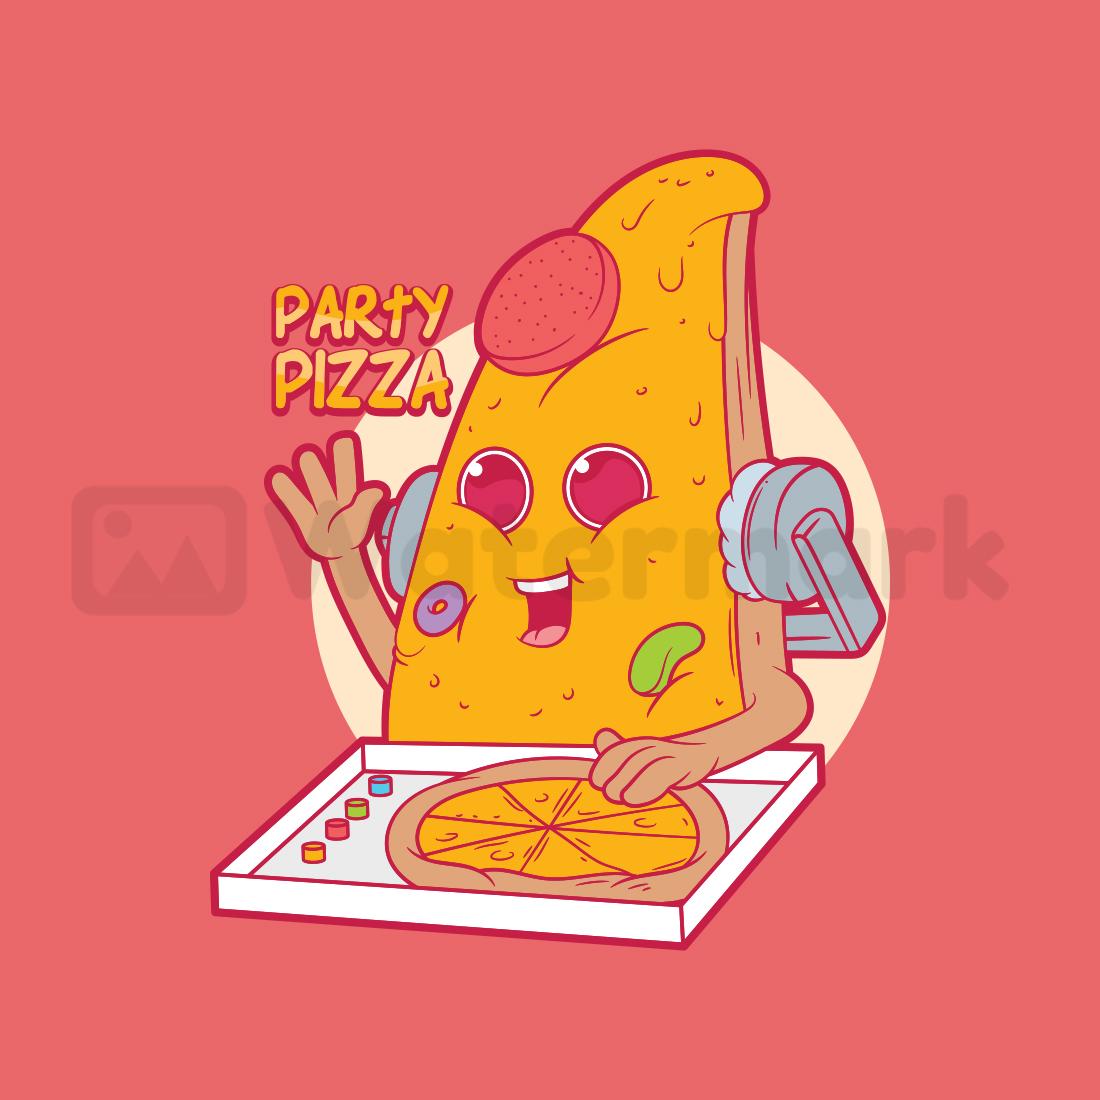 Party Pizza Vector Graphics Design cover image.